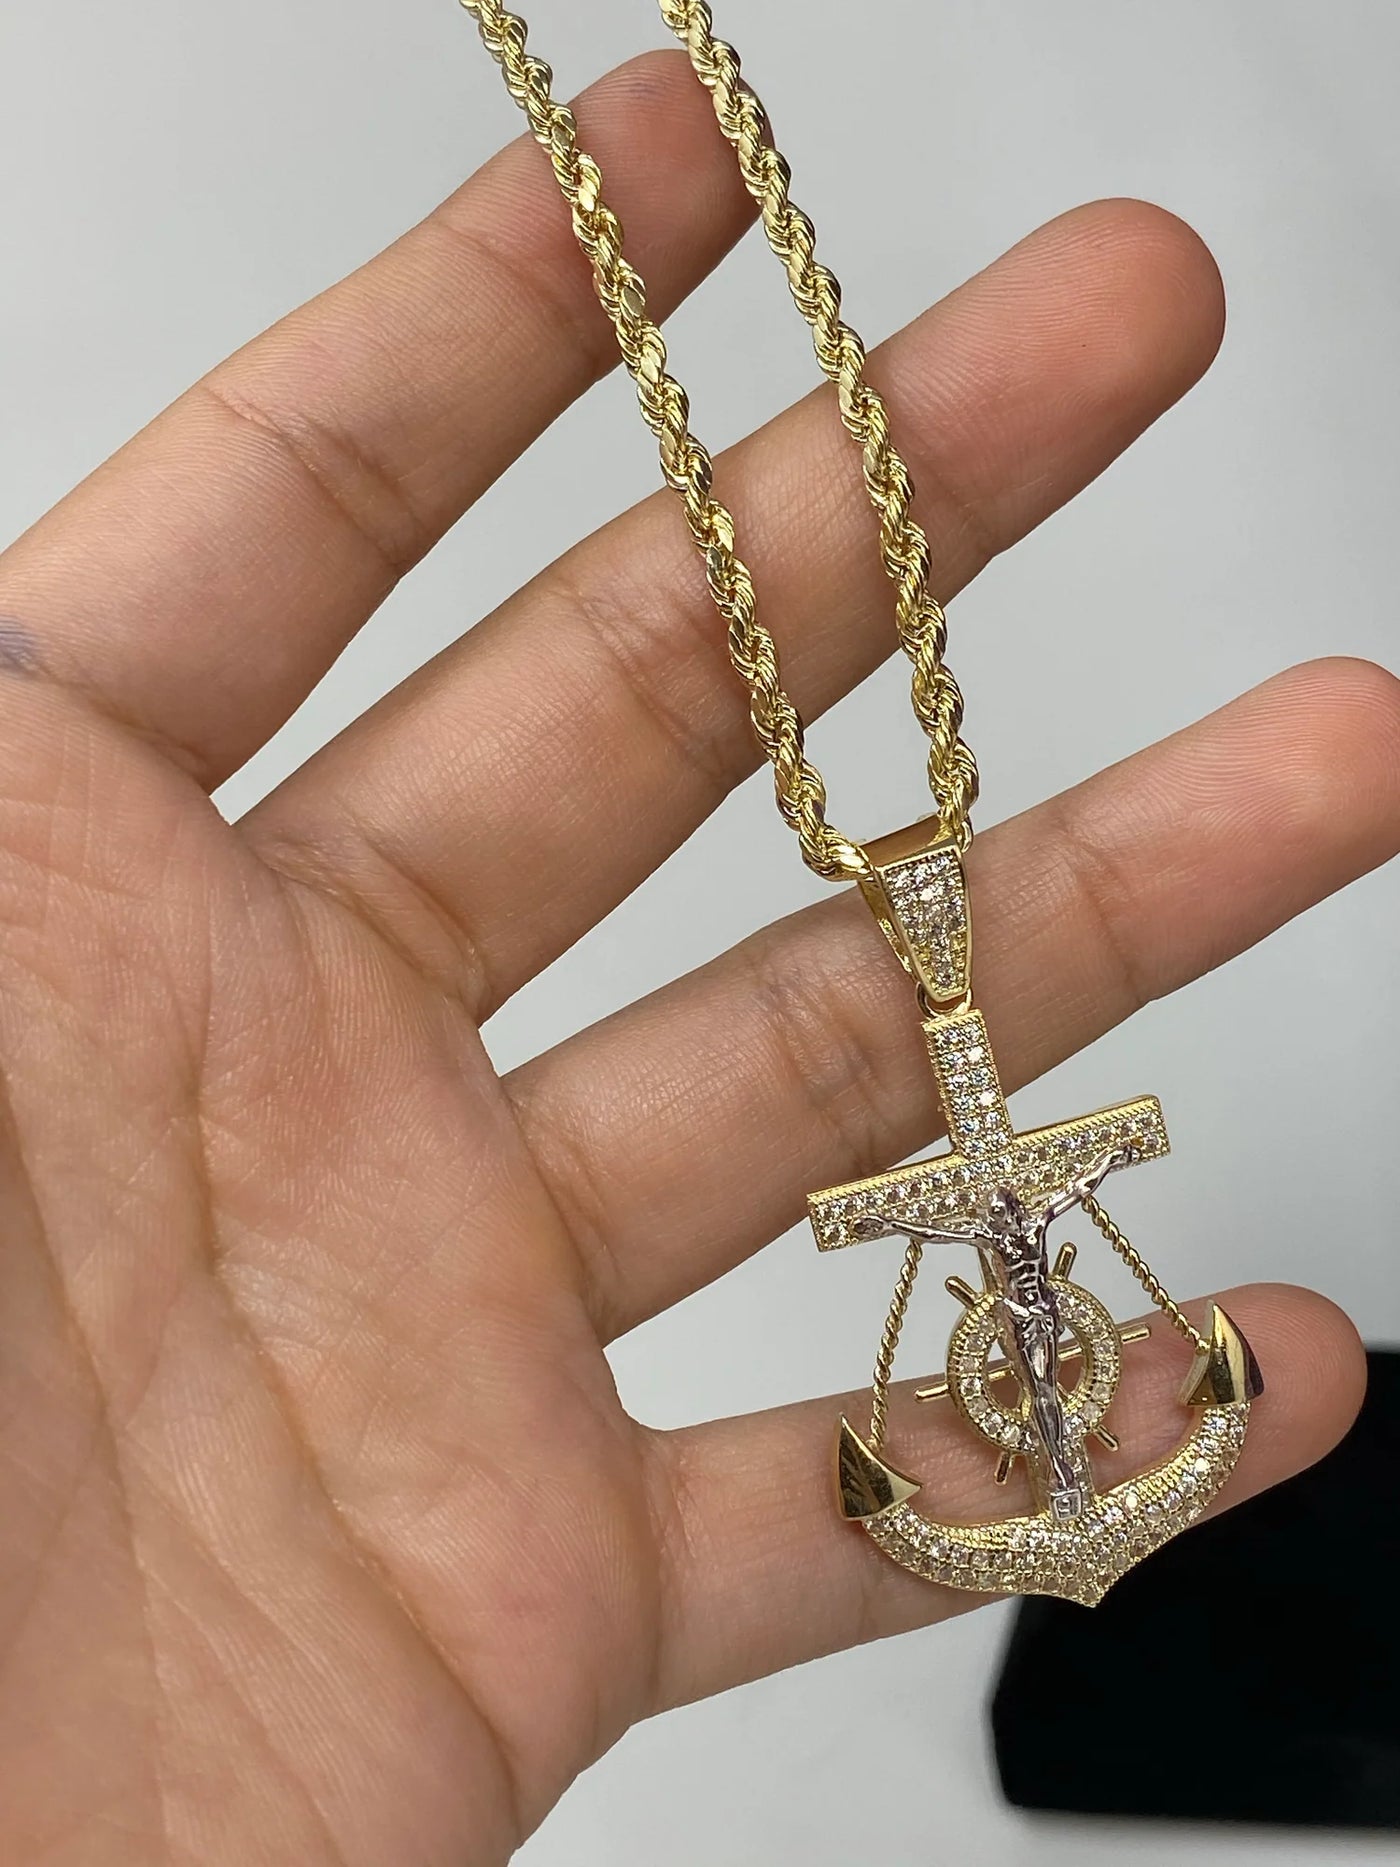 14k Gold Anchor with stones , iced out ( pendant or chain set )